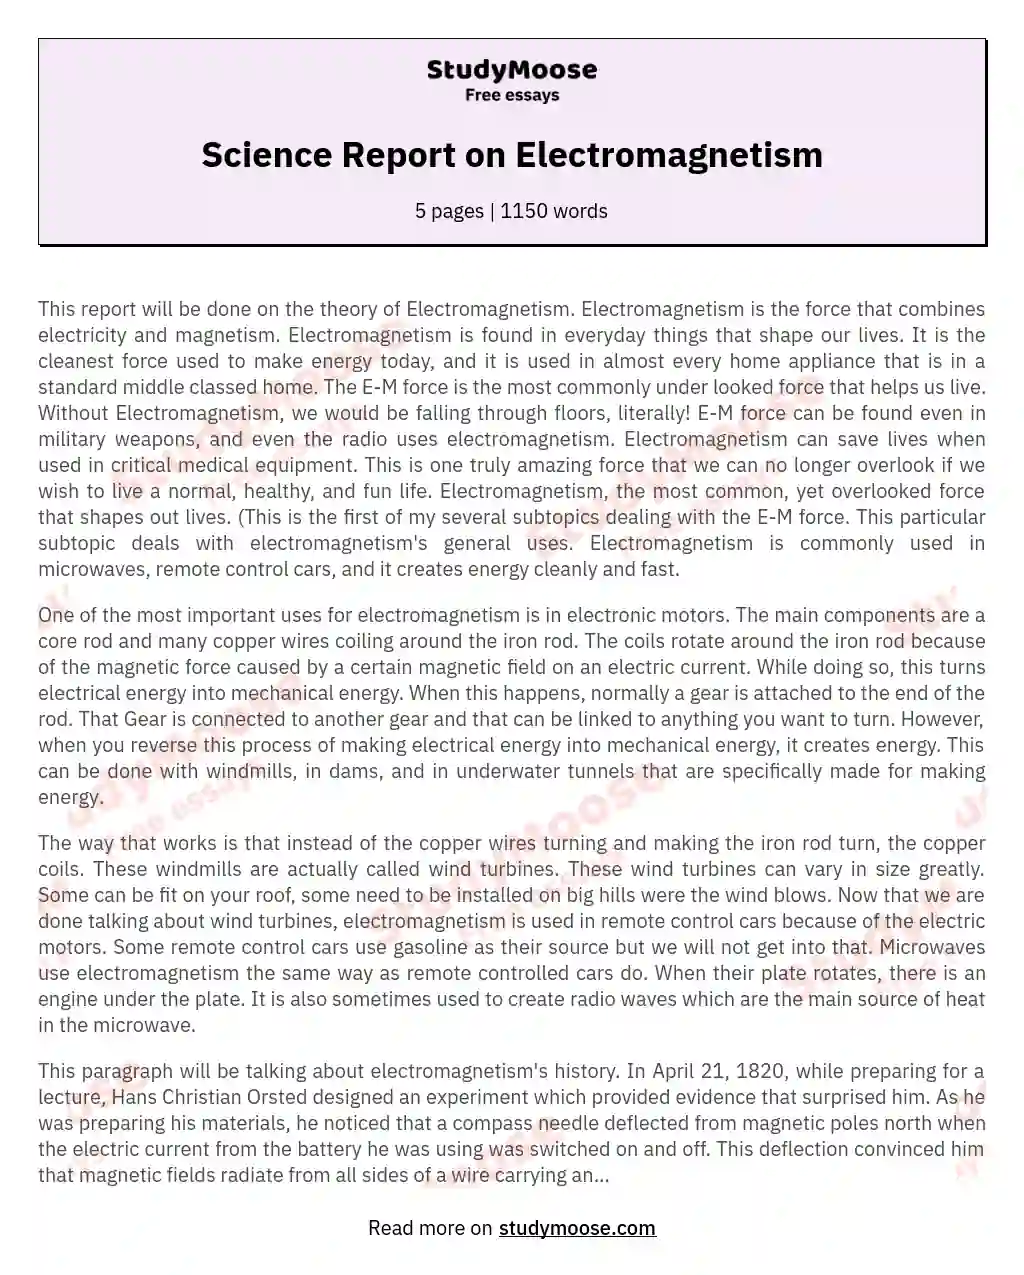 Science Report on Electromagnetism essay